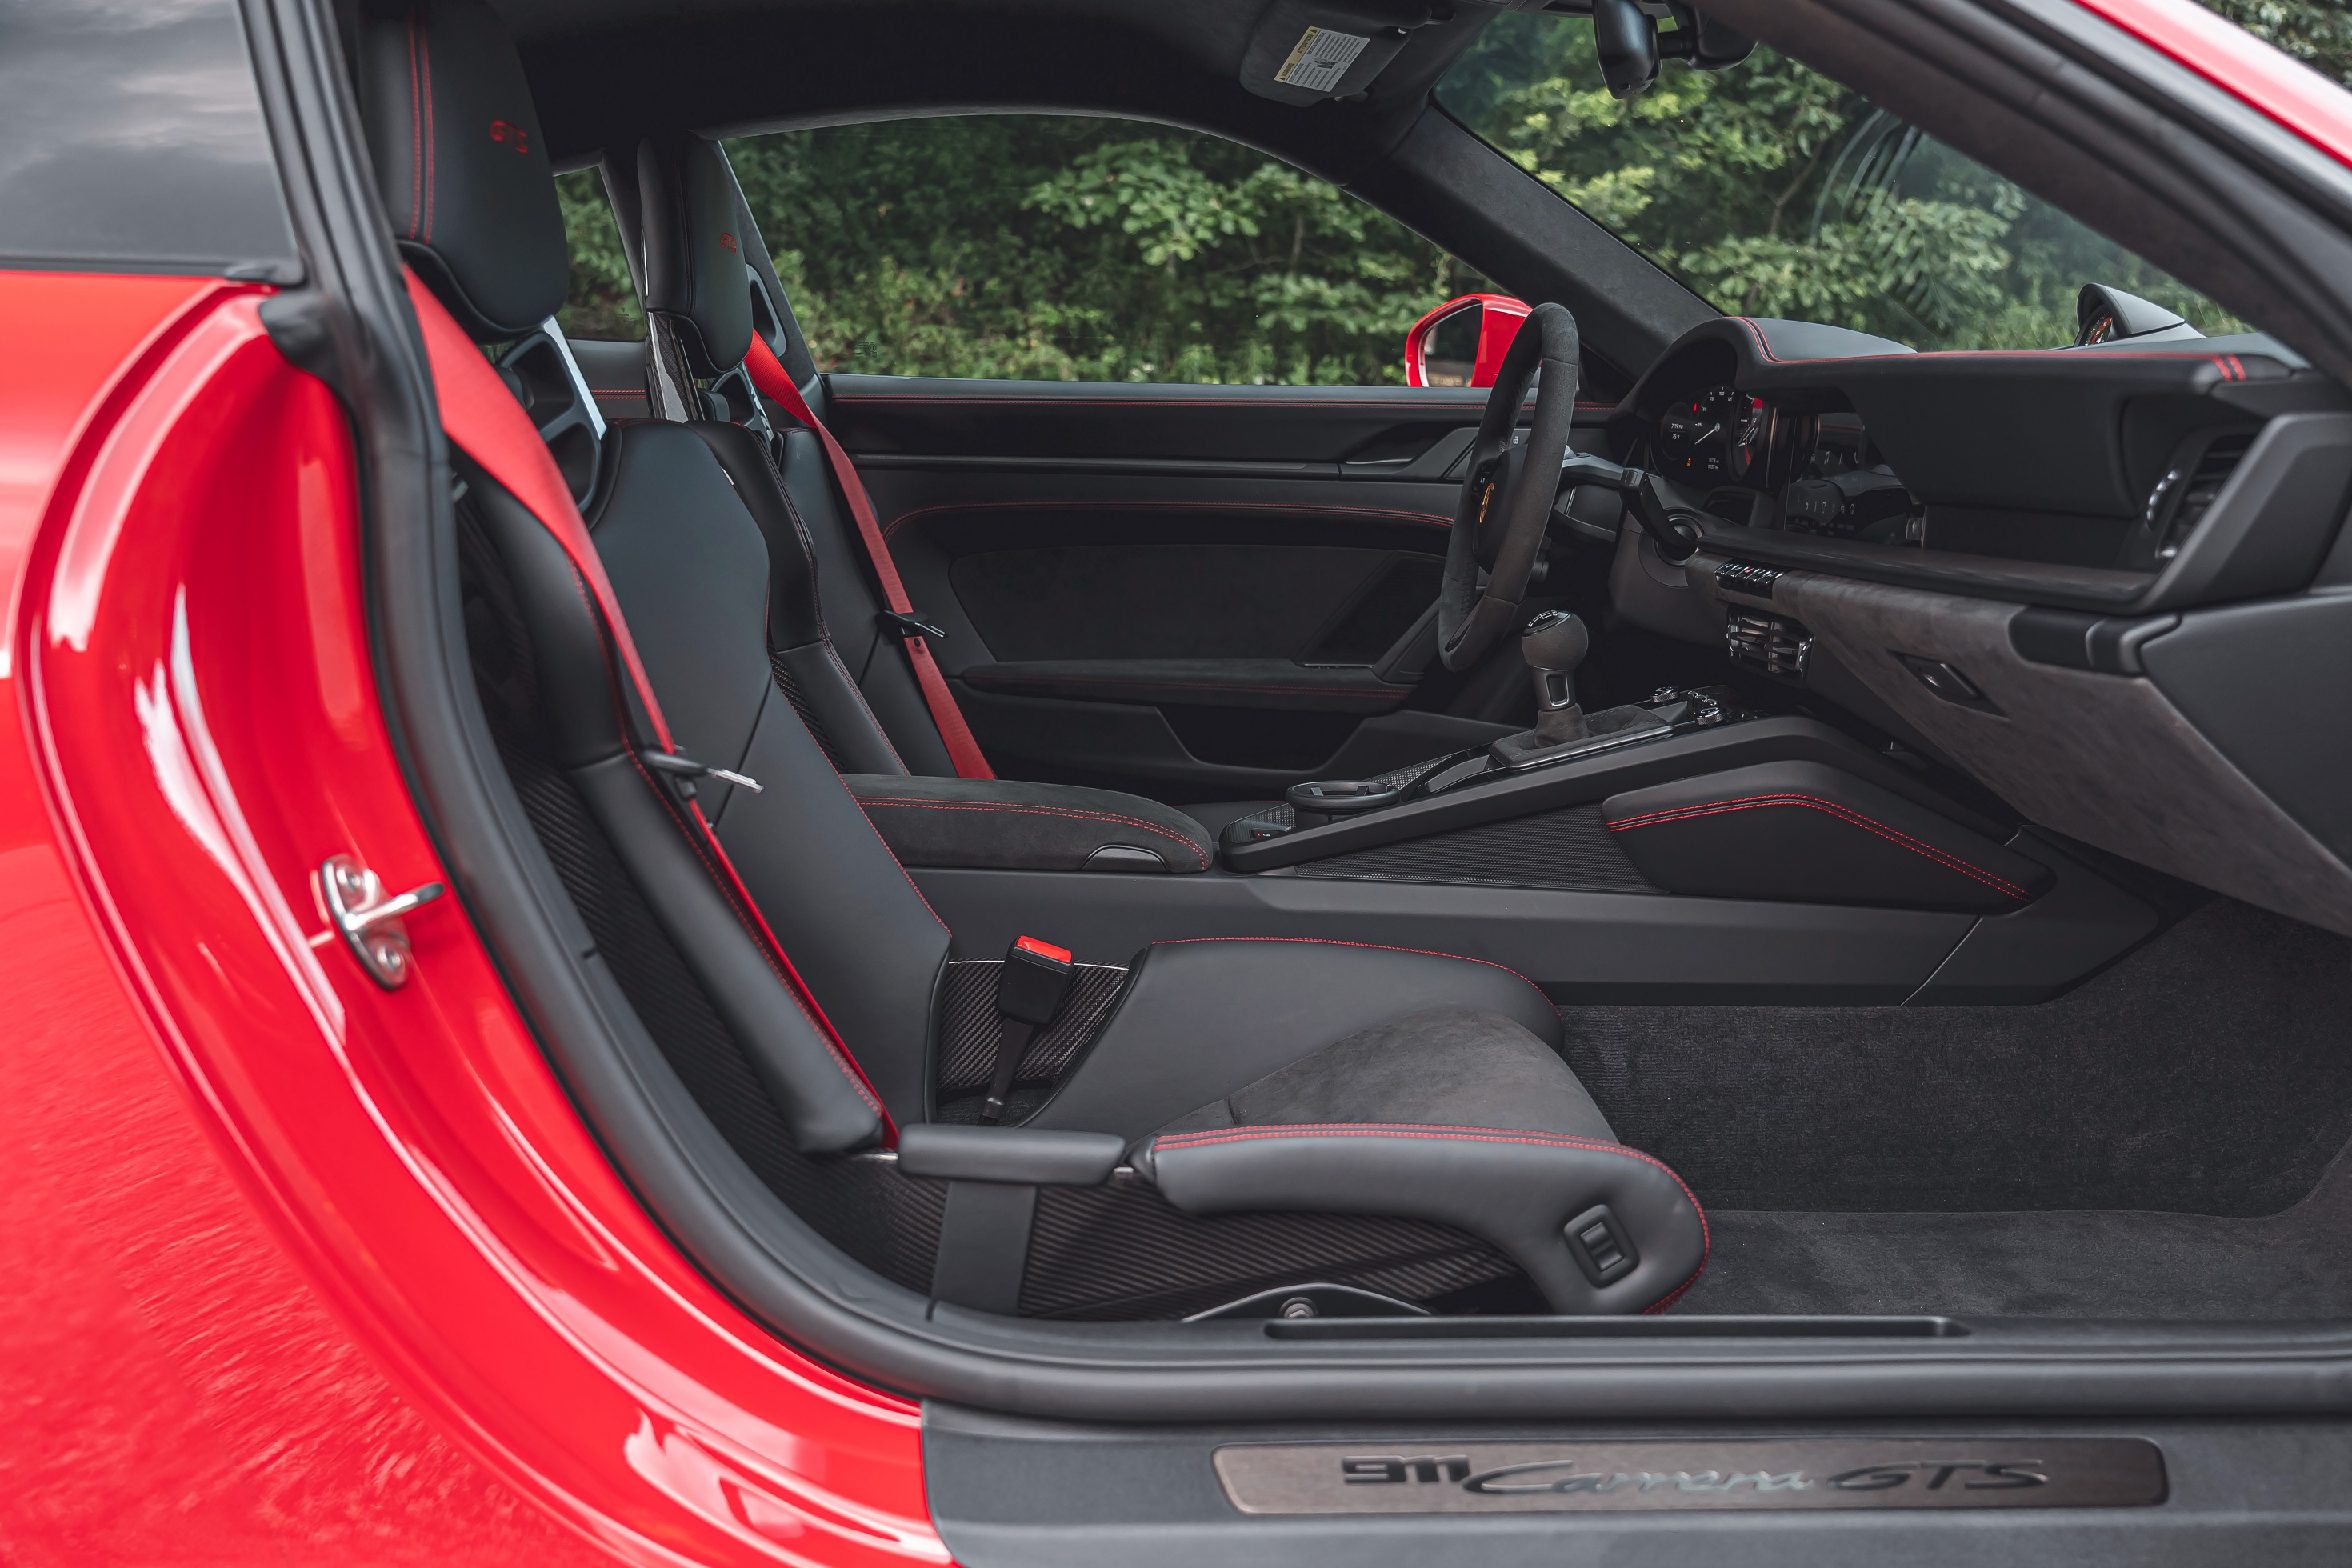 The black and red stitched front sports seats and dashboard of a red 2022 Porsche 911 Carrera GTS